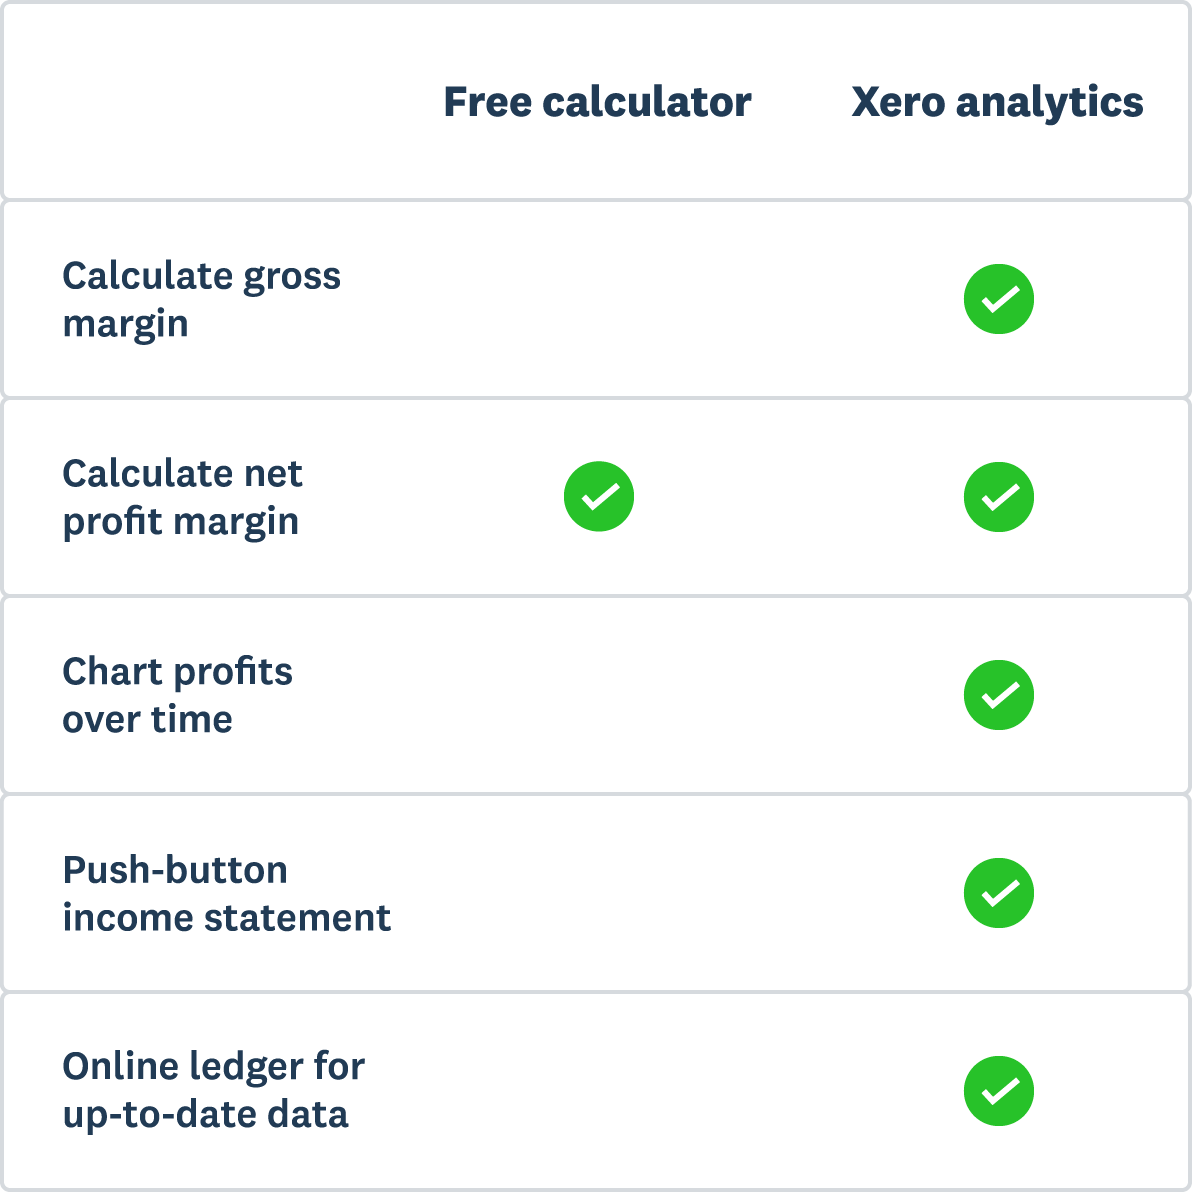 Xero analytics will calculate your gross margin, net profit margin, chart profits over time, push button income statement